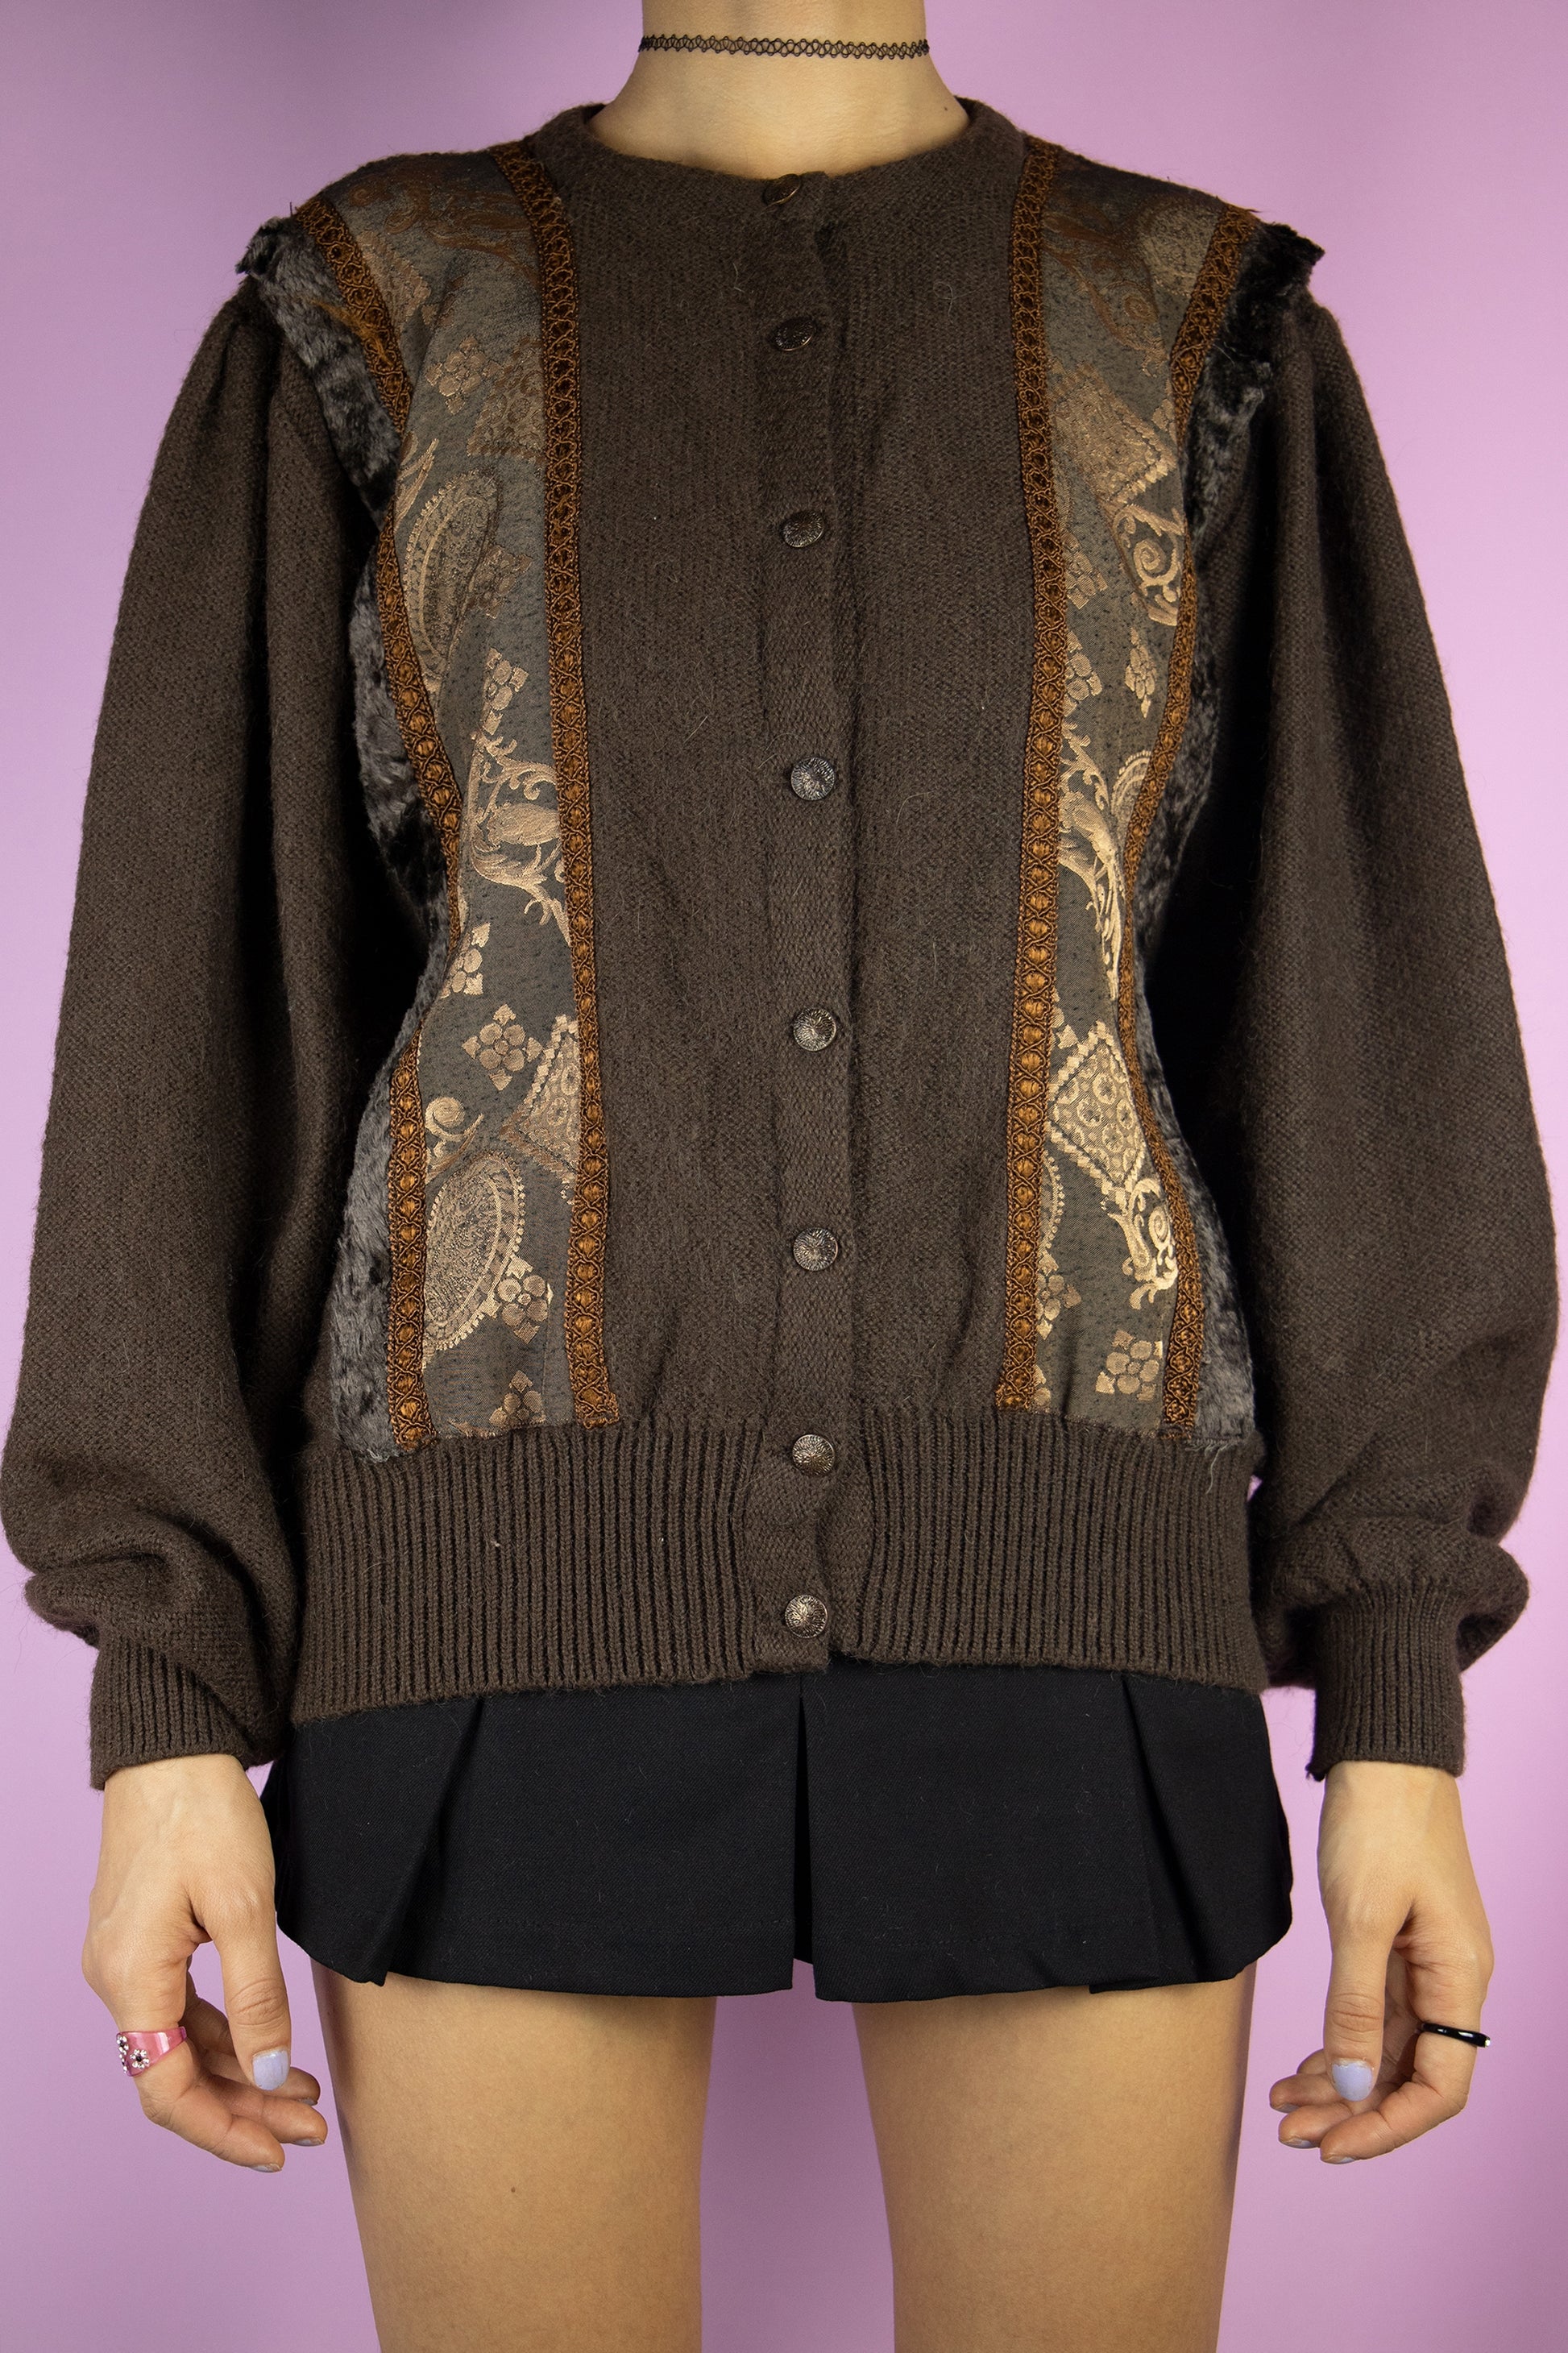 The Vintage 90s Brown Puff Sleeve Cardigan is a dark brown mohair blend cardigan with embroidered and faux fur details and puff sleeves. Boho fairy grunge 1990s knitted sweater.